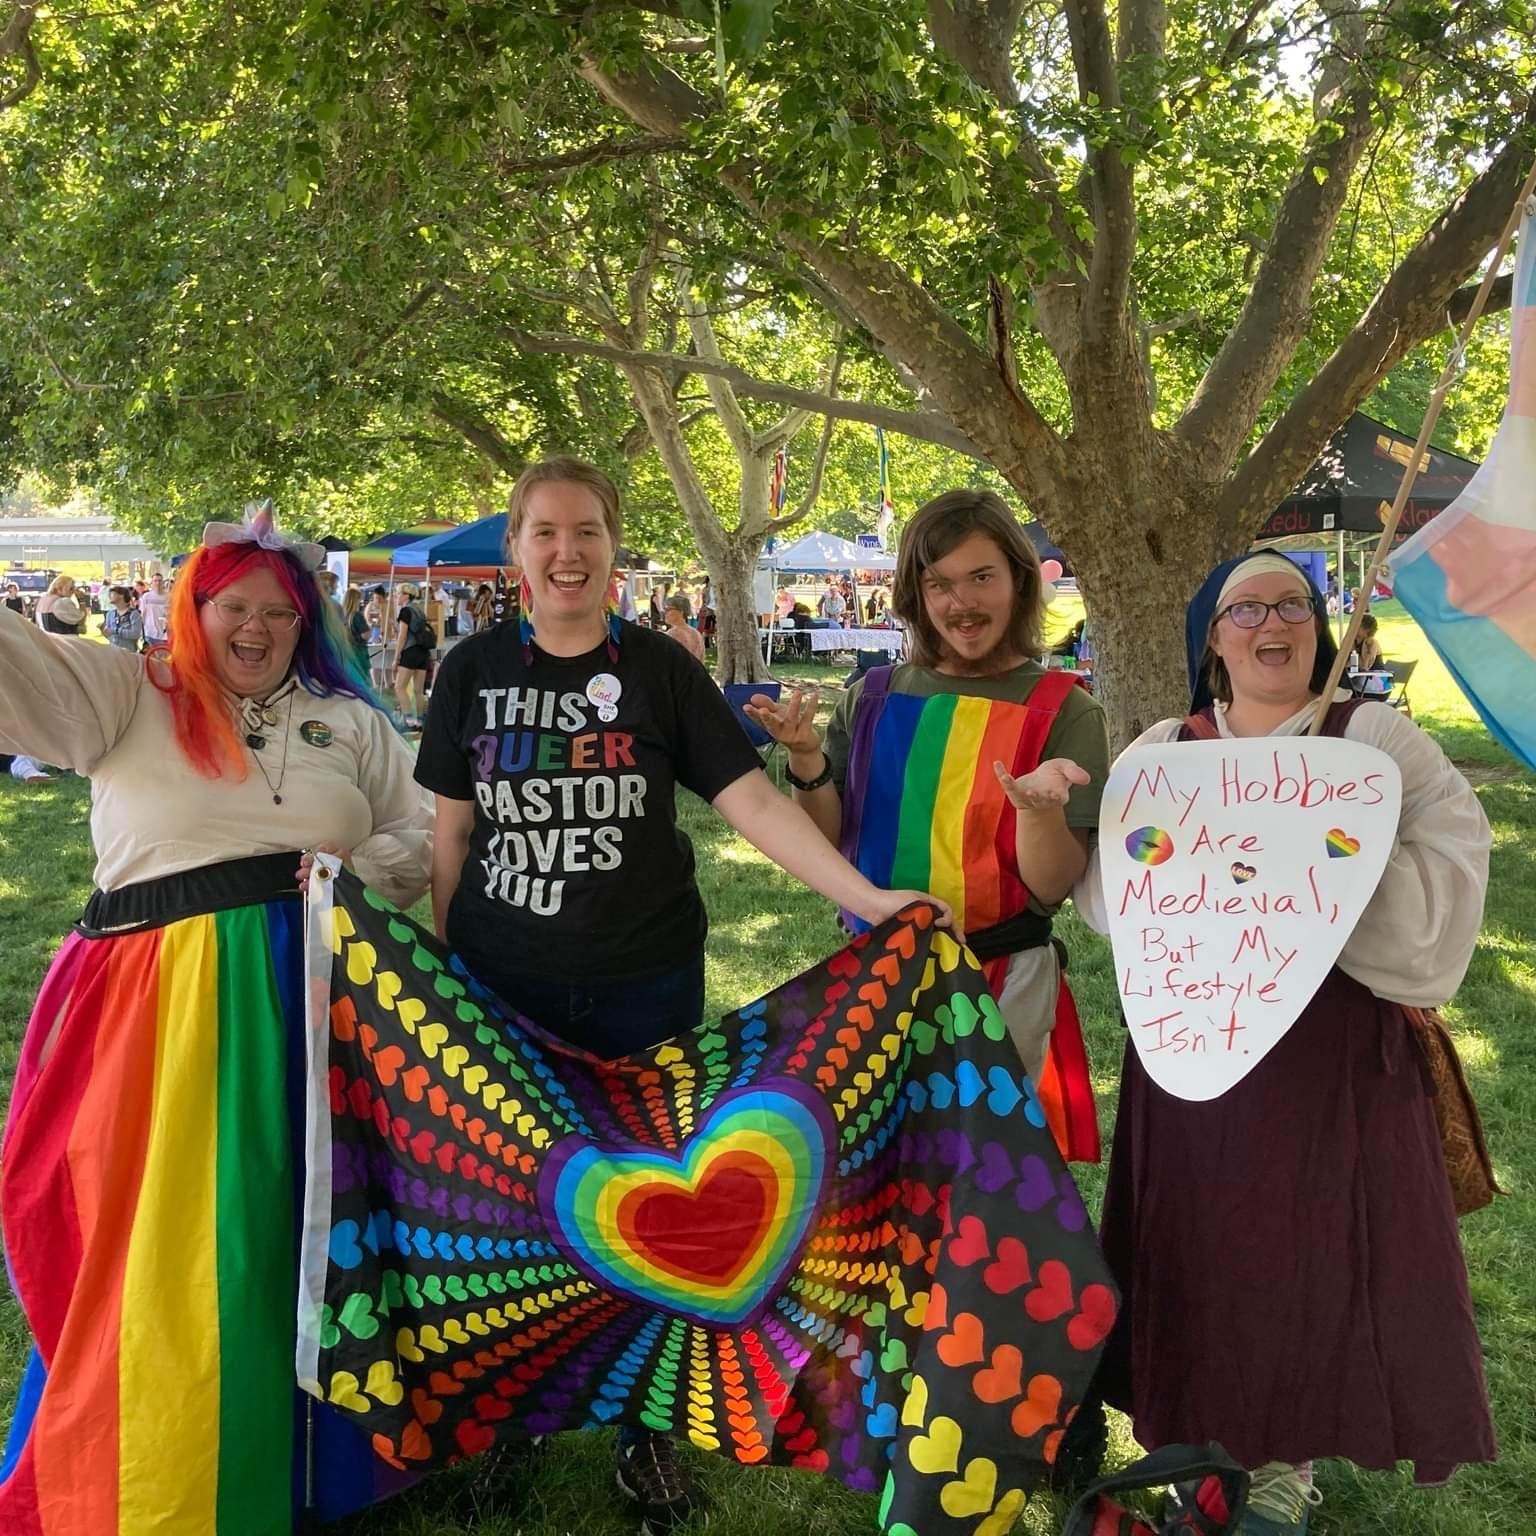 some of the attendees in Rennaisance garb with rainbow flags and decor. One wears a shirt that says 'This queer pastor loves you' and another has a sign that says 'my hobbies are medieval but my lifestyle isn't'u